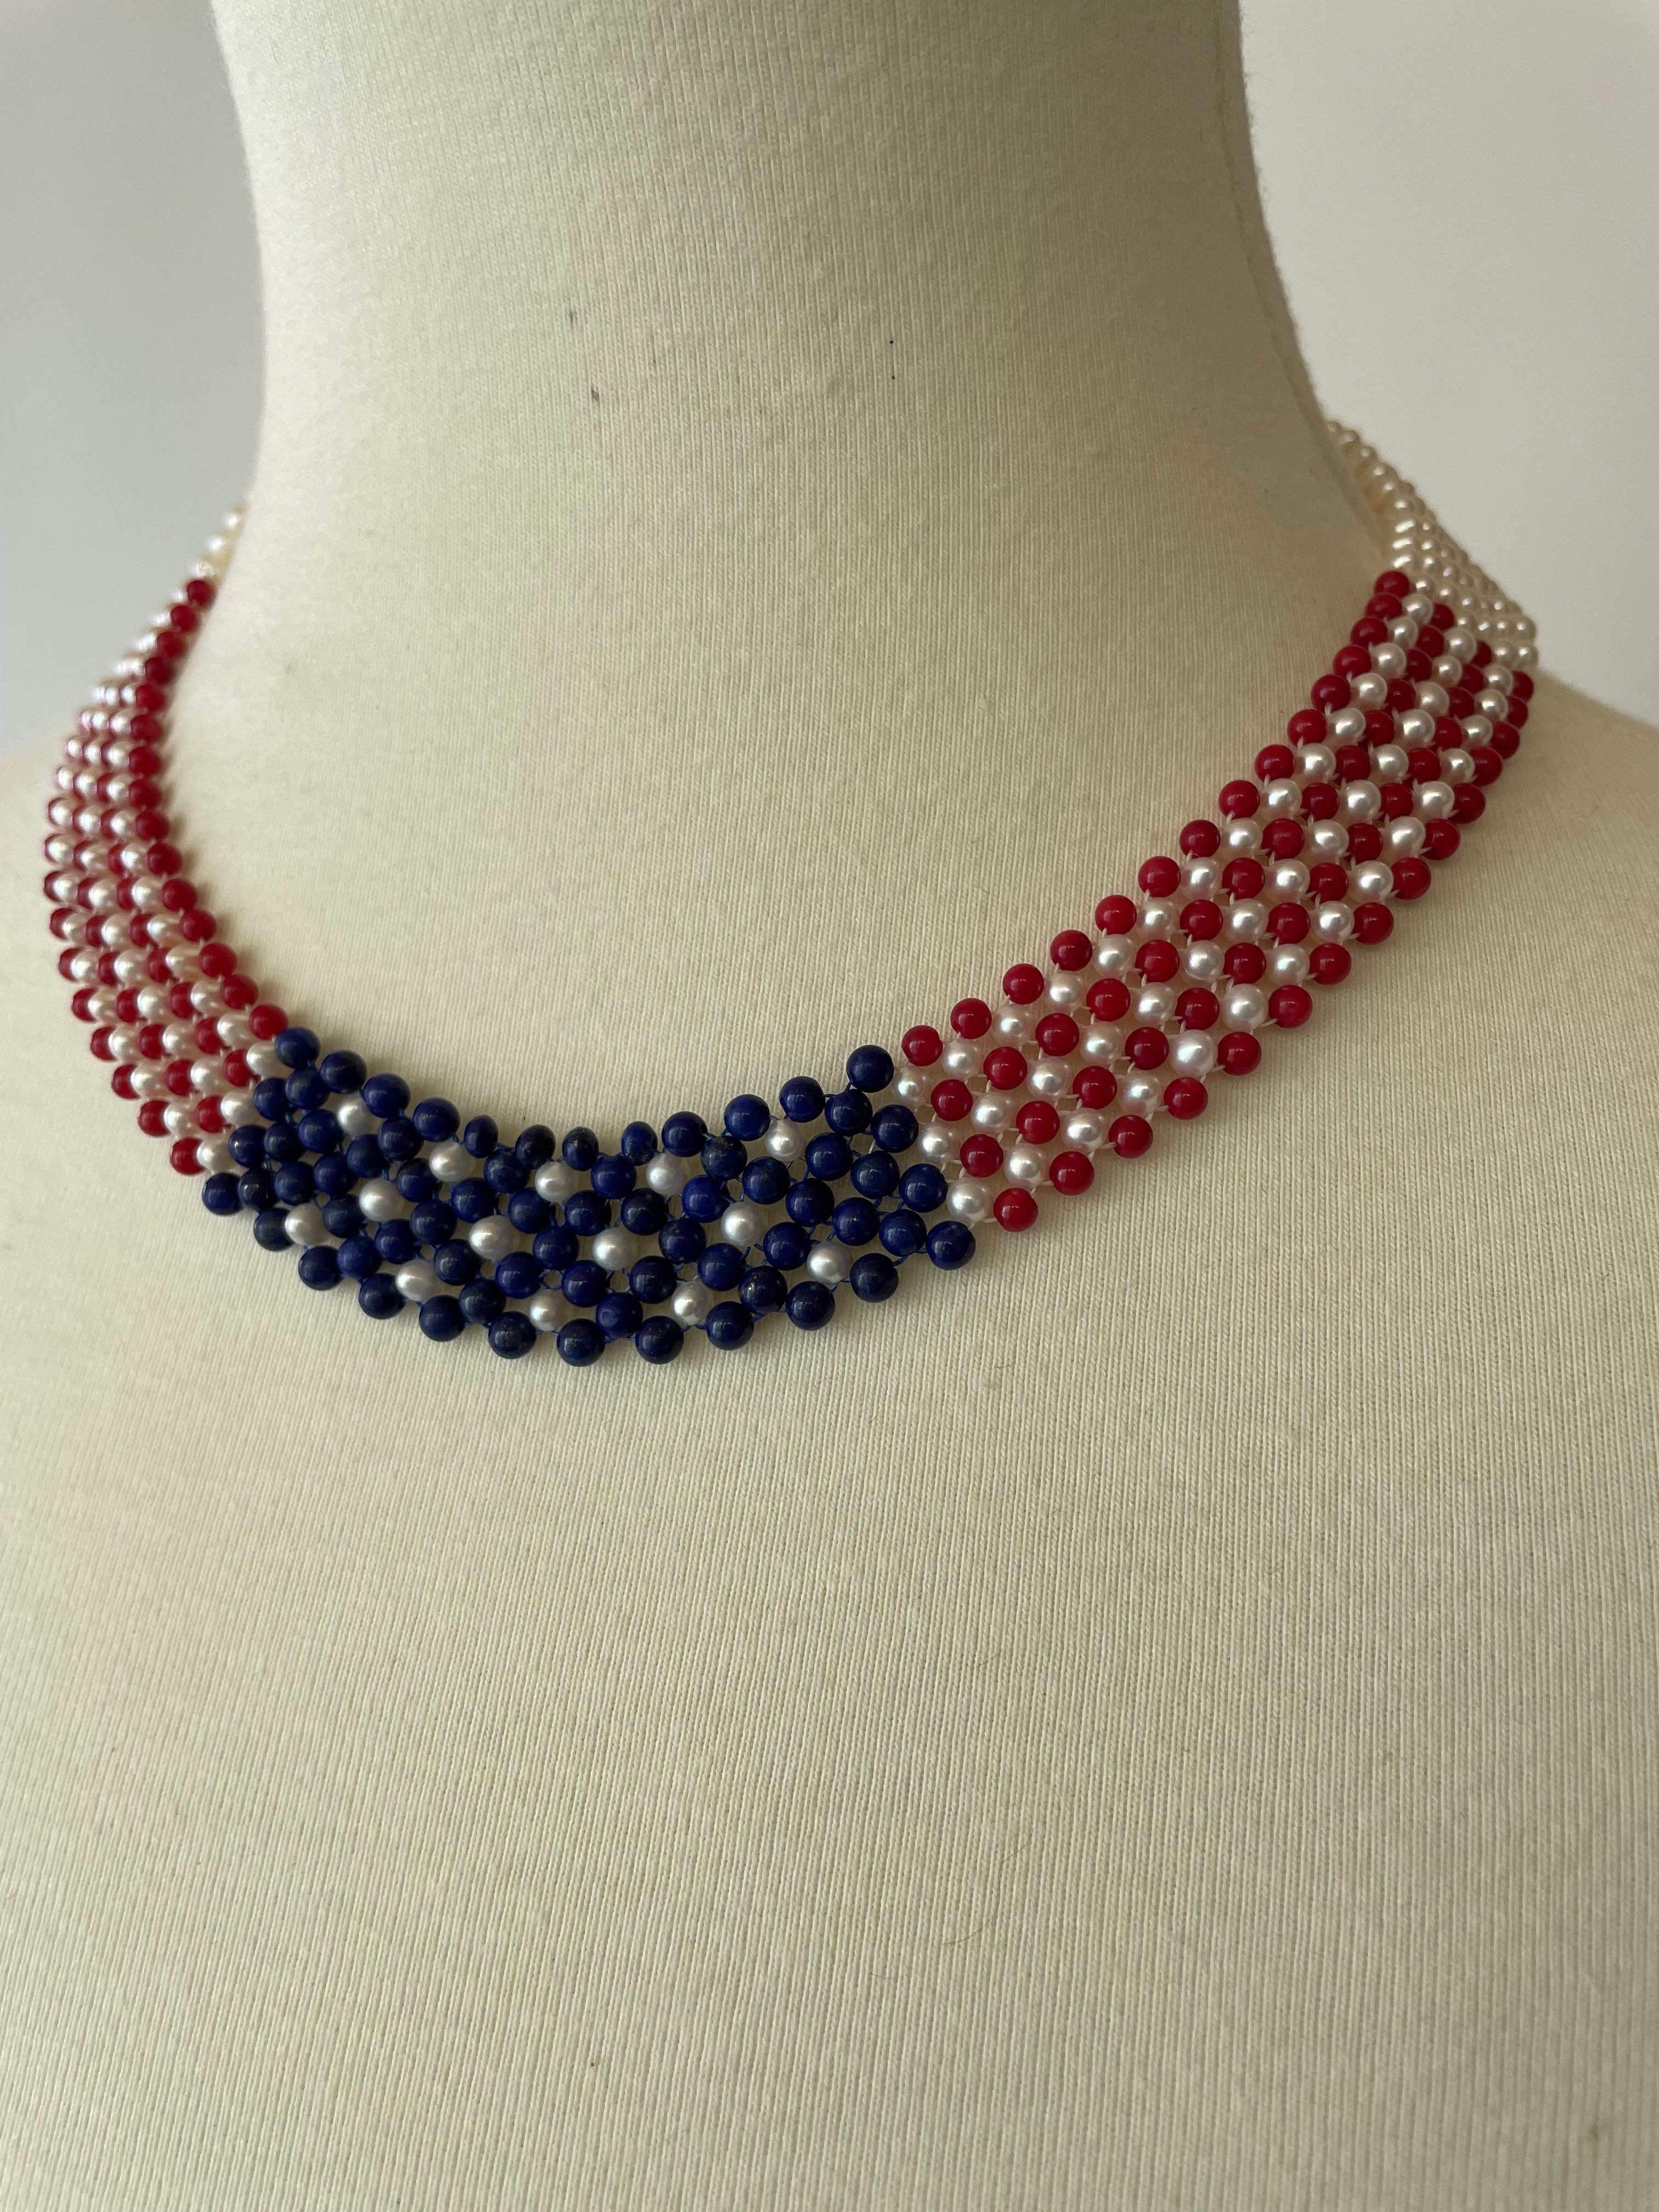 Marina J. American Flag Woven Pearl, Coral, & Lapis Necklace with 14K Yellow G. For Sale 1